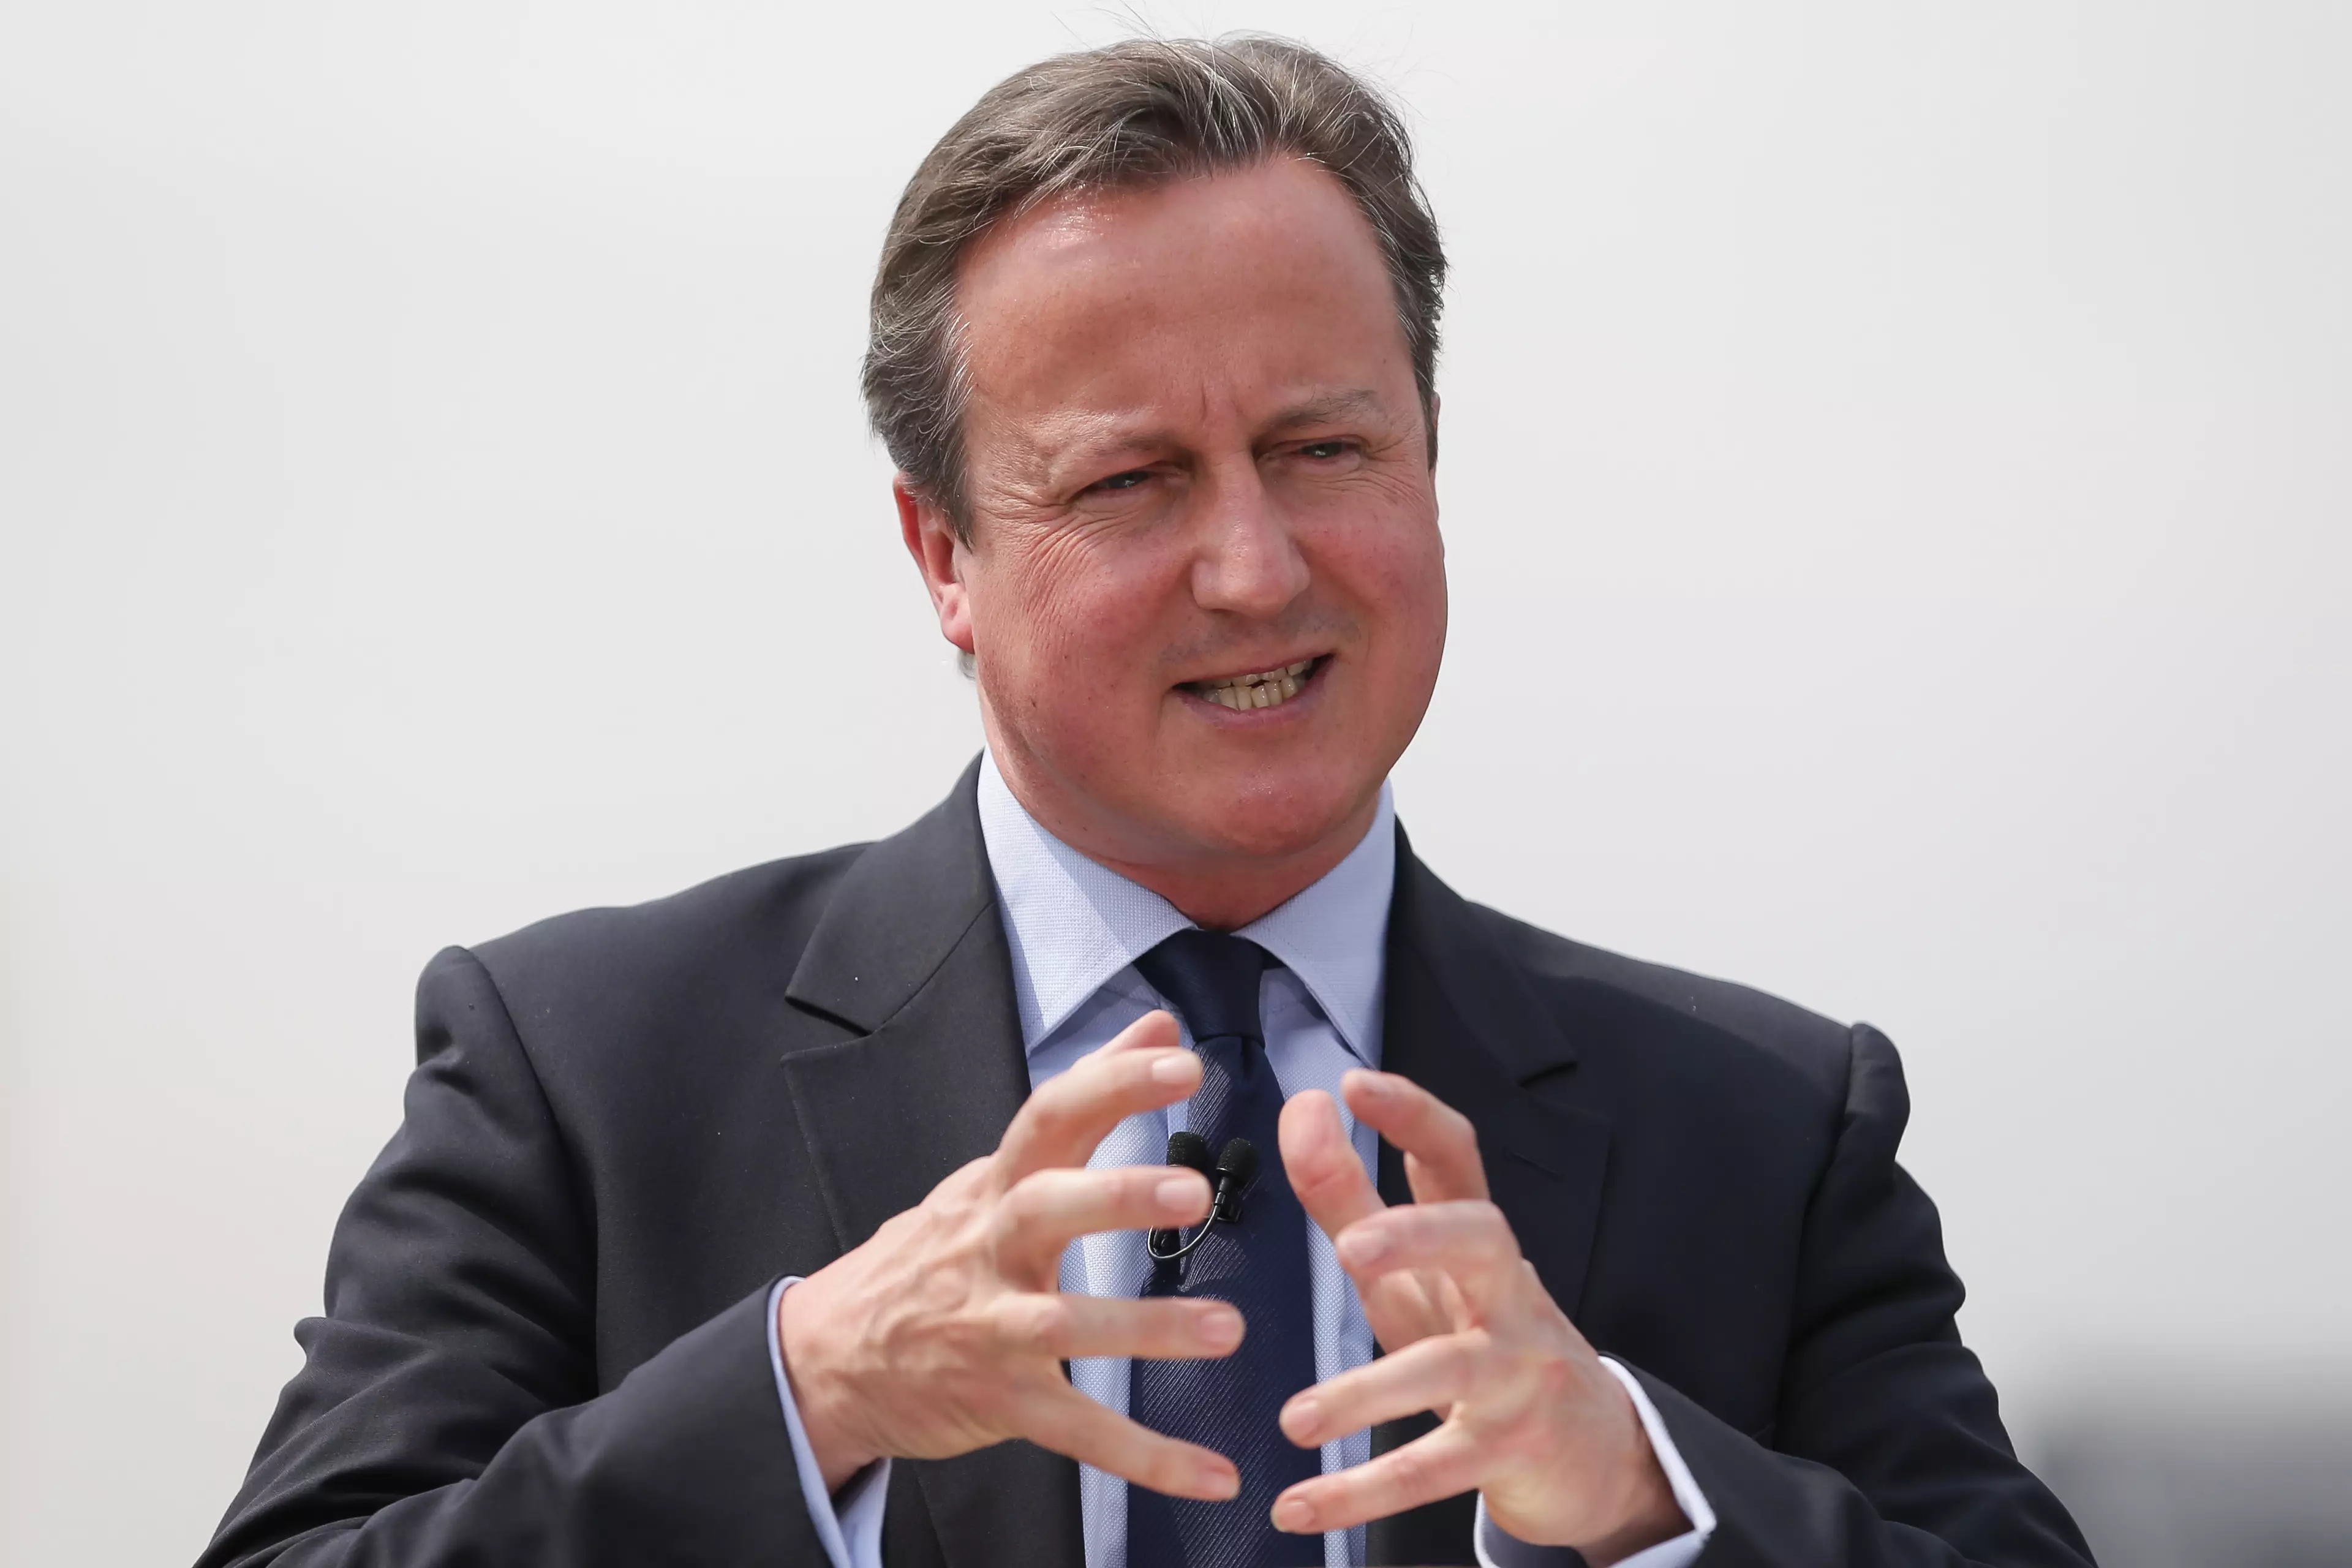 David Cameron Suggests That Scottish People Should Support England, Gets Immediately Shot Down